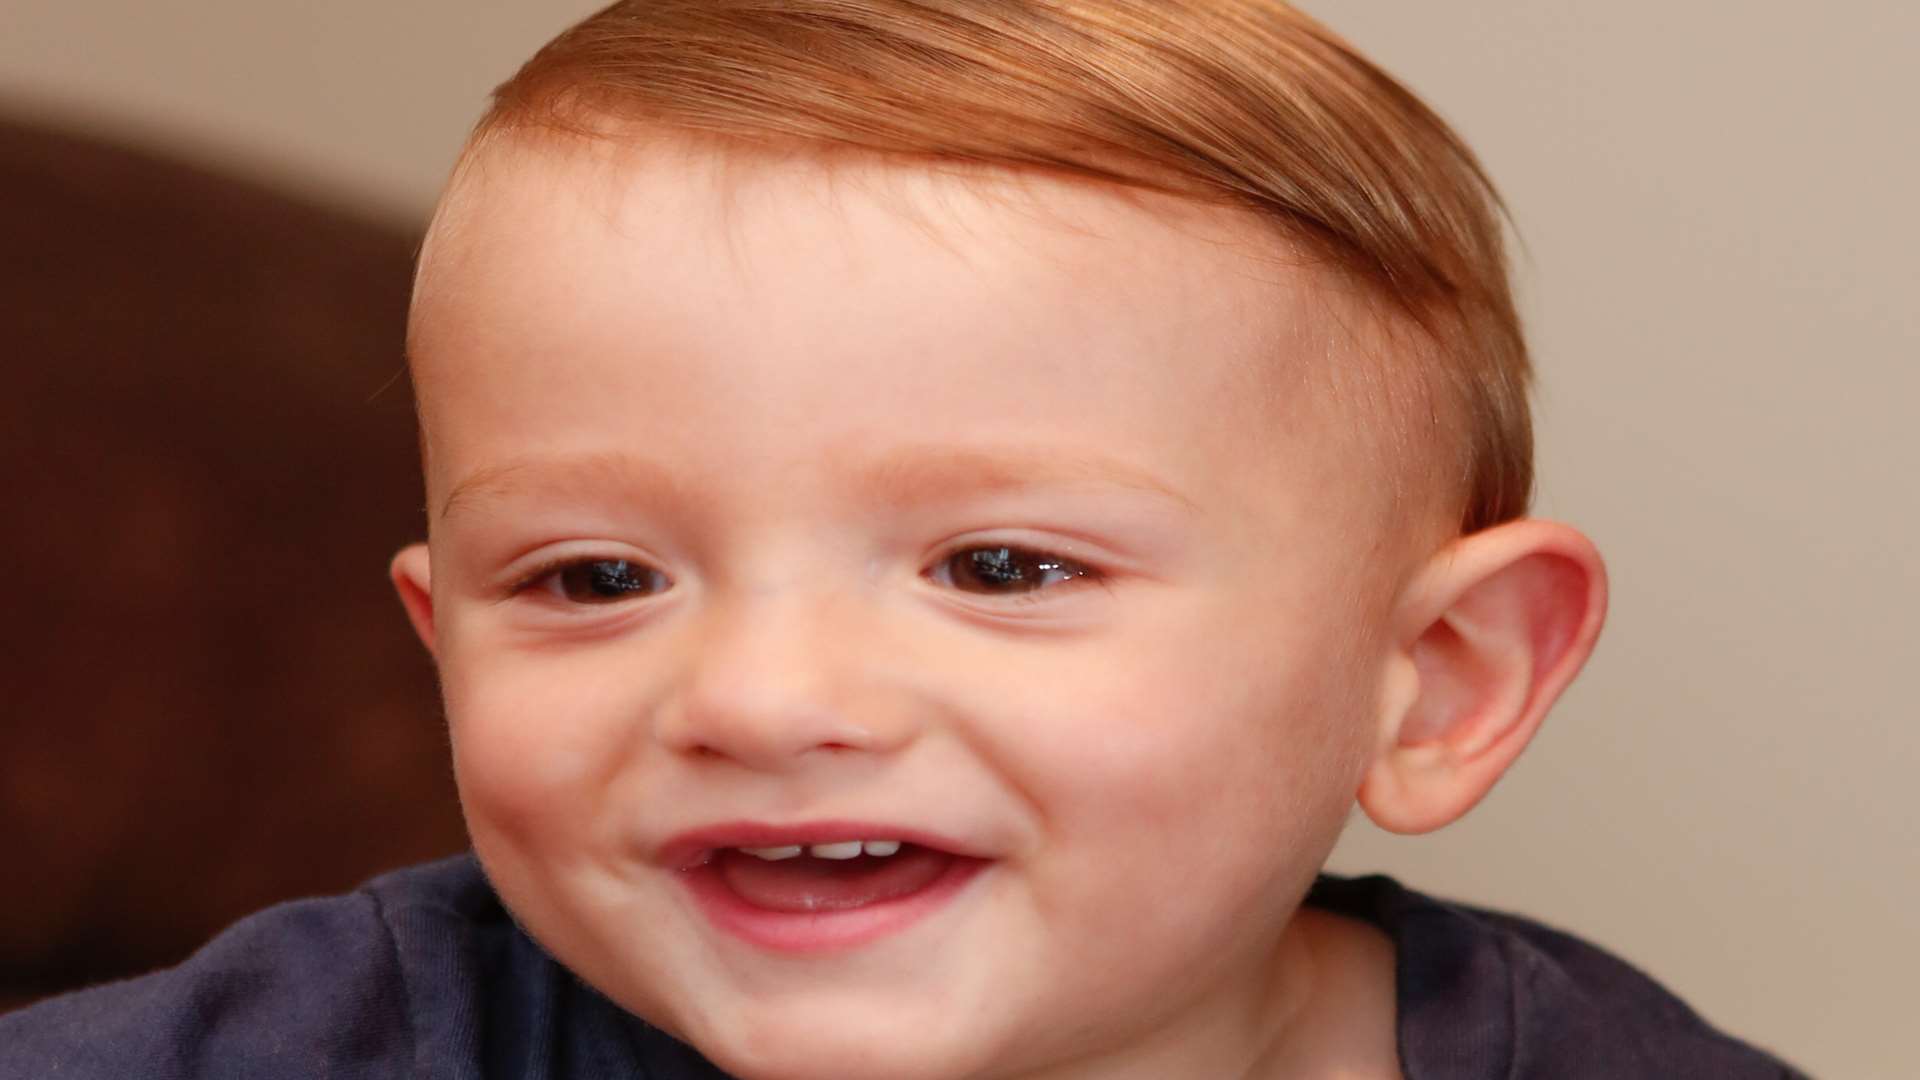 18 month old Dennis Shoer was given just a 30% chance of surviving after being born prematurely